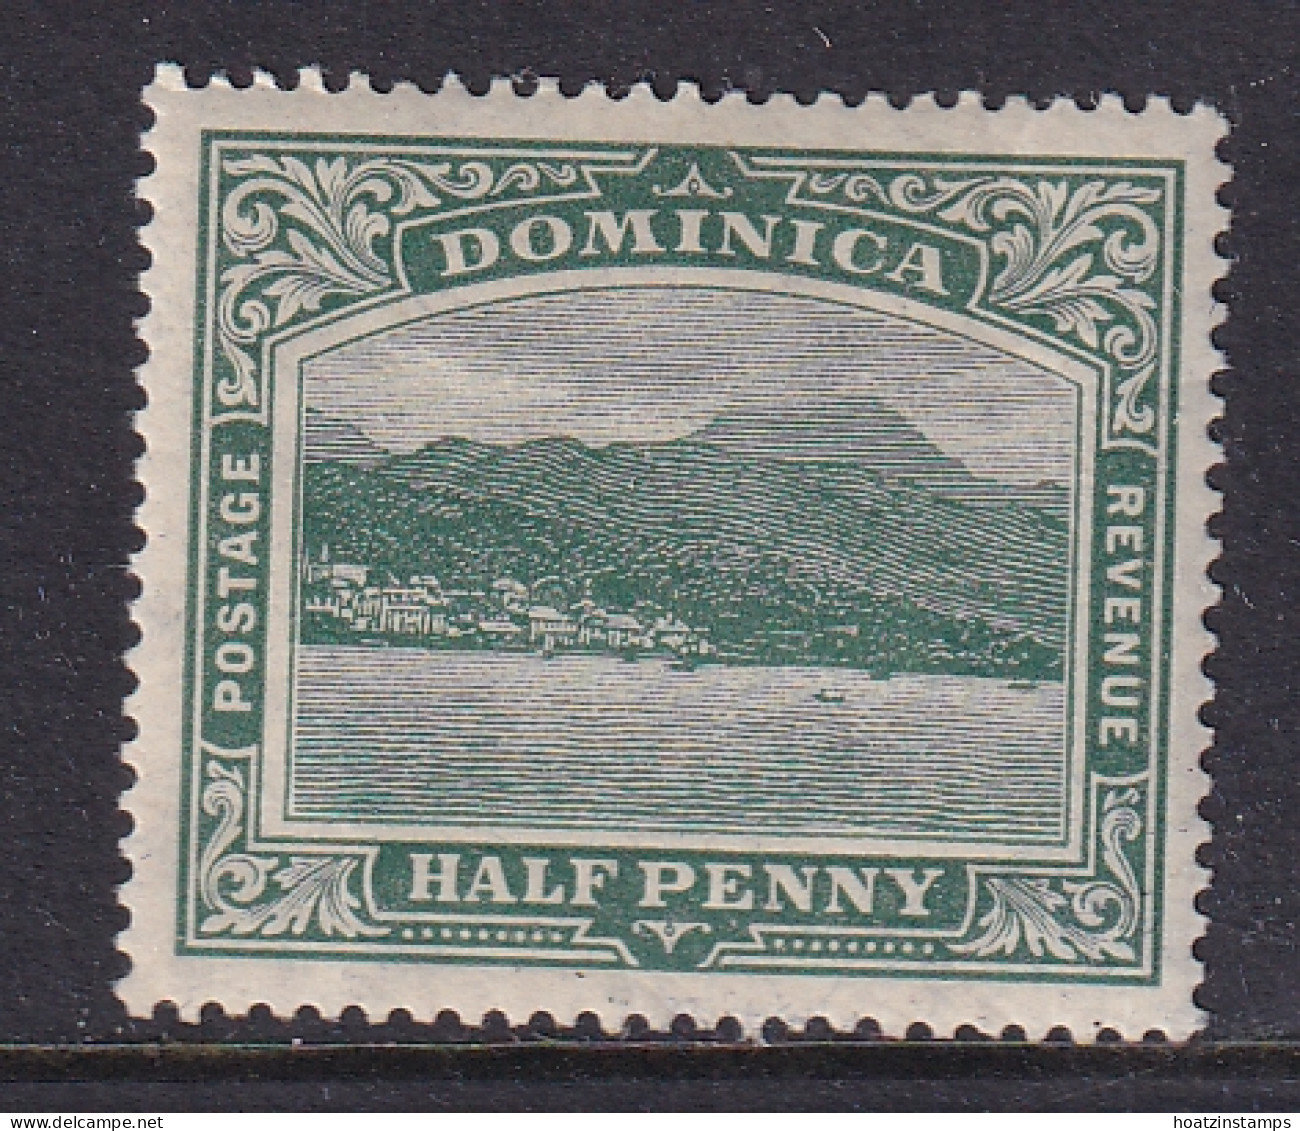 Dominica: 1908/20   Rouseau From The Sea    SG47aw    ½d   Blue-green  [Wmk: Crown To Left Of CA]    MH - Dominique (...-1978)